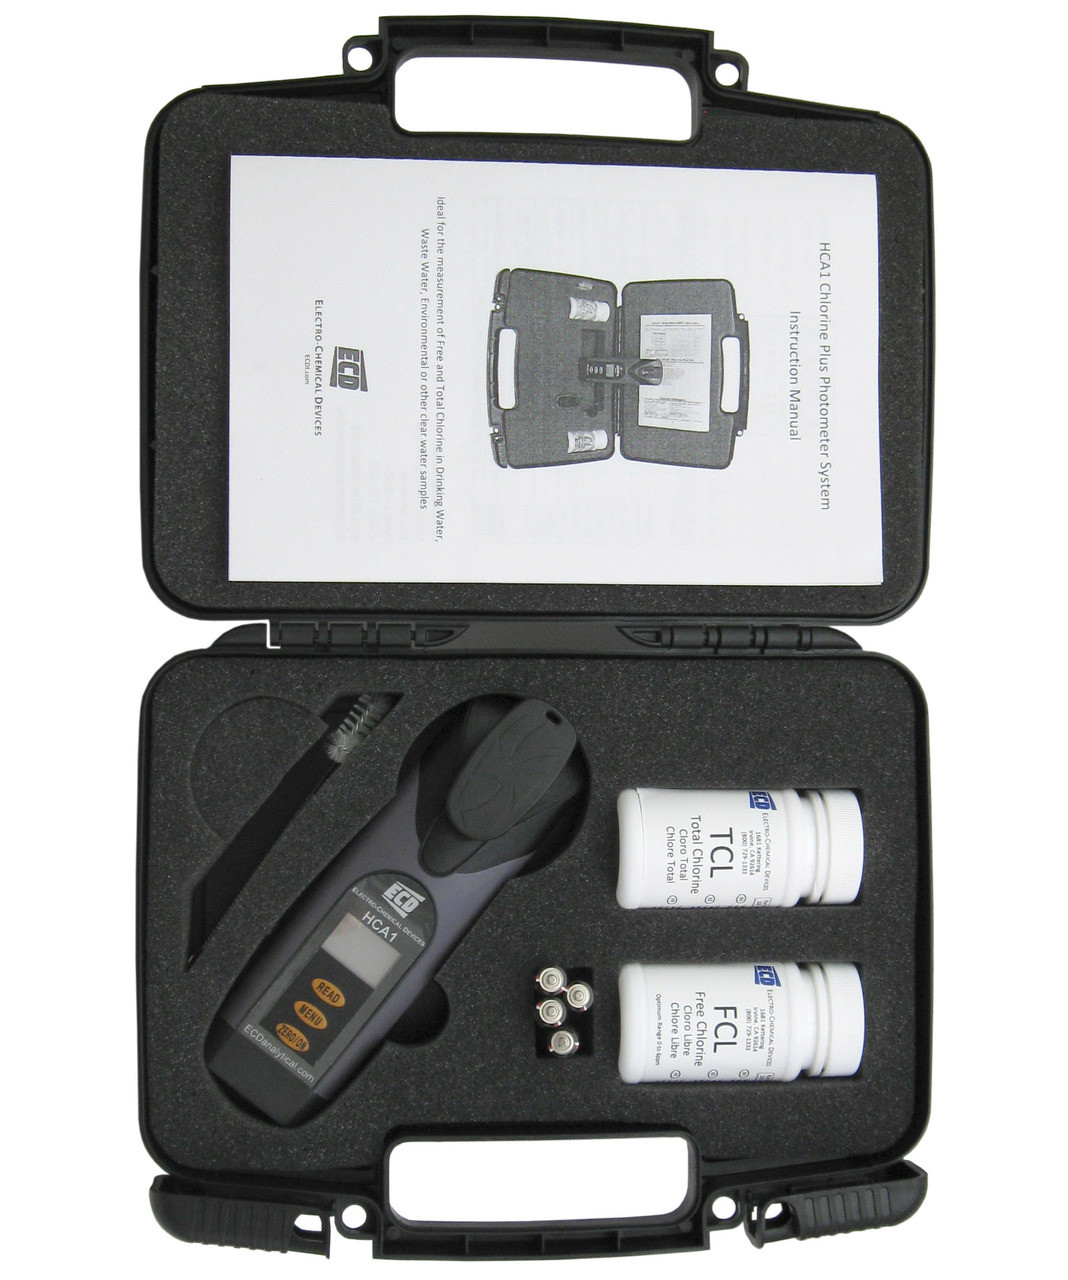 Chloramine Test Kit with Electronic Meter, in plastic case (WC